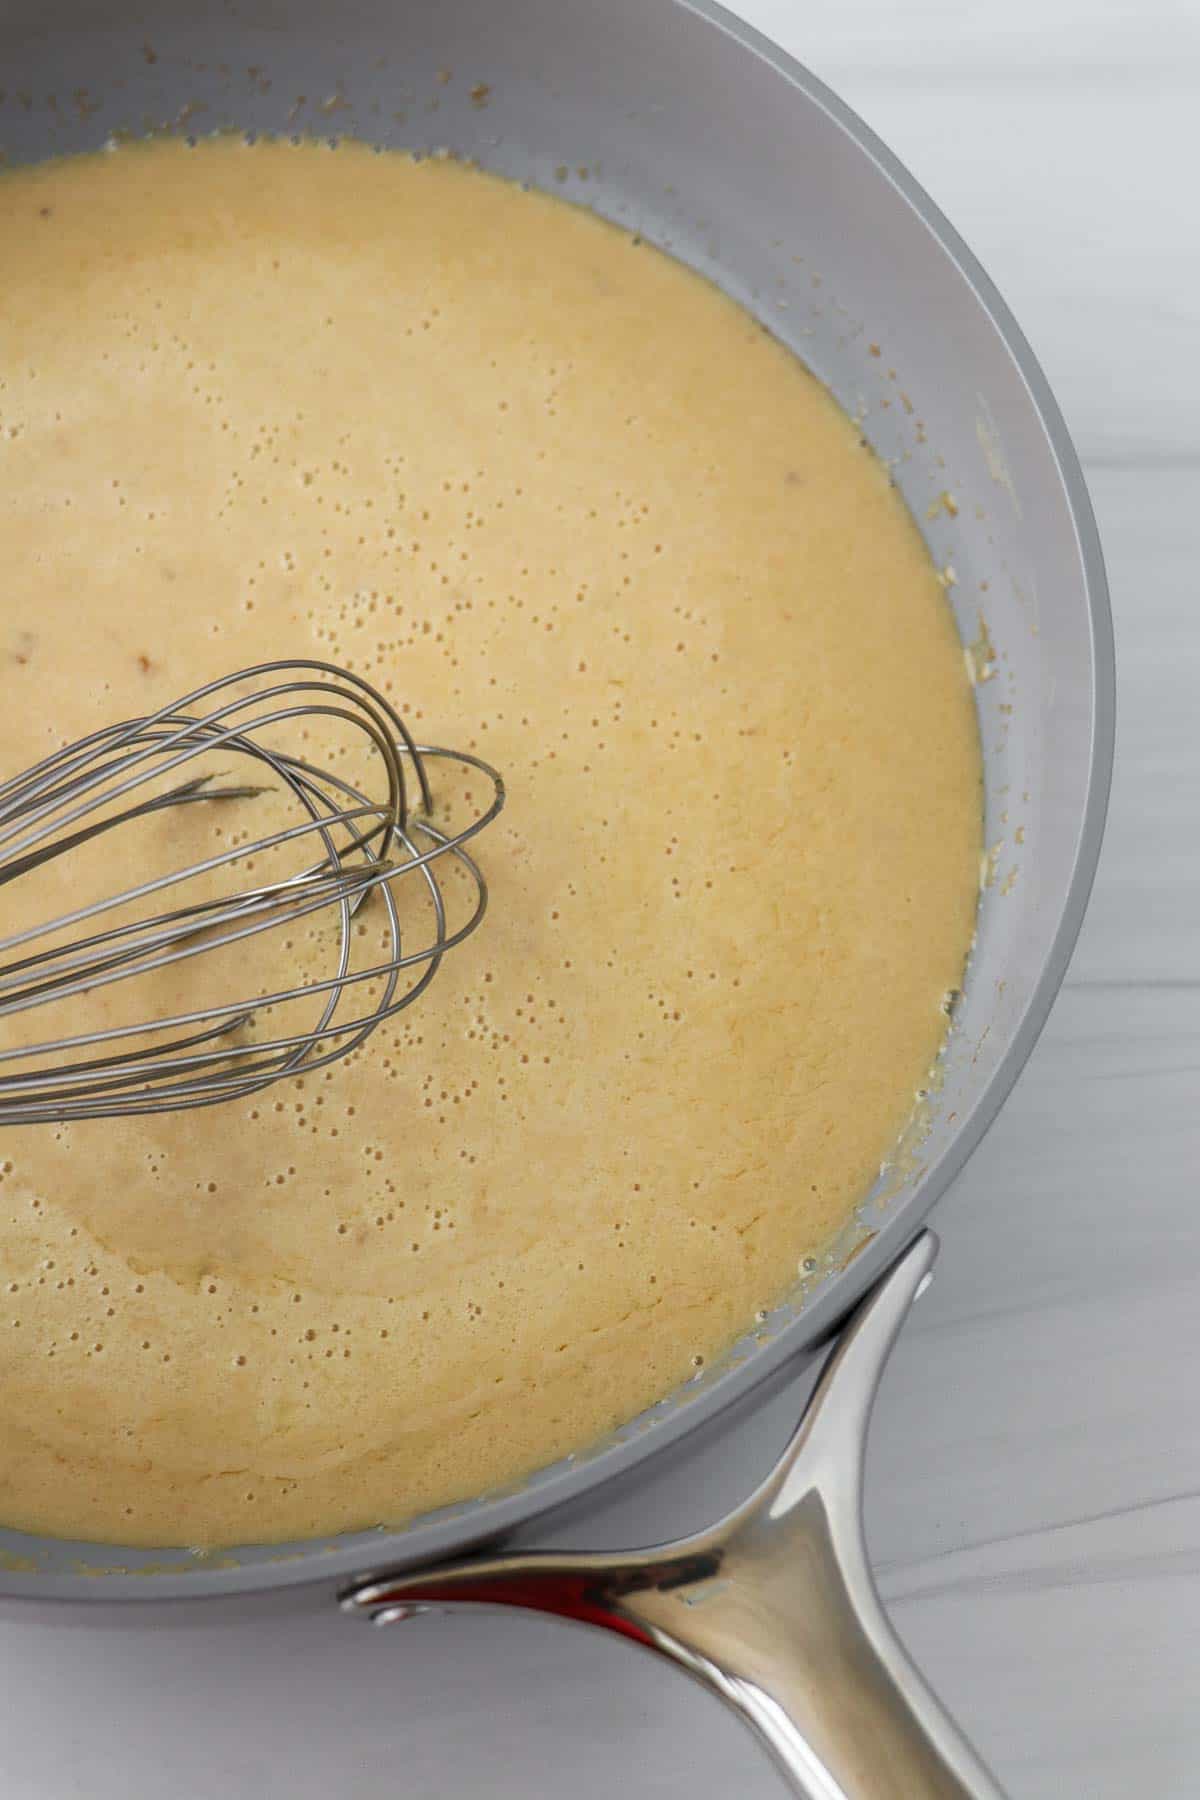 Gravy in a gray pan with a whisk.